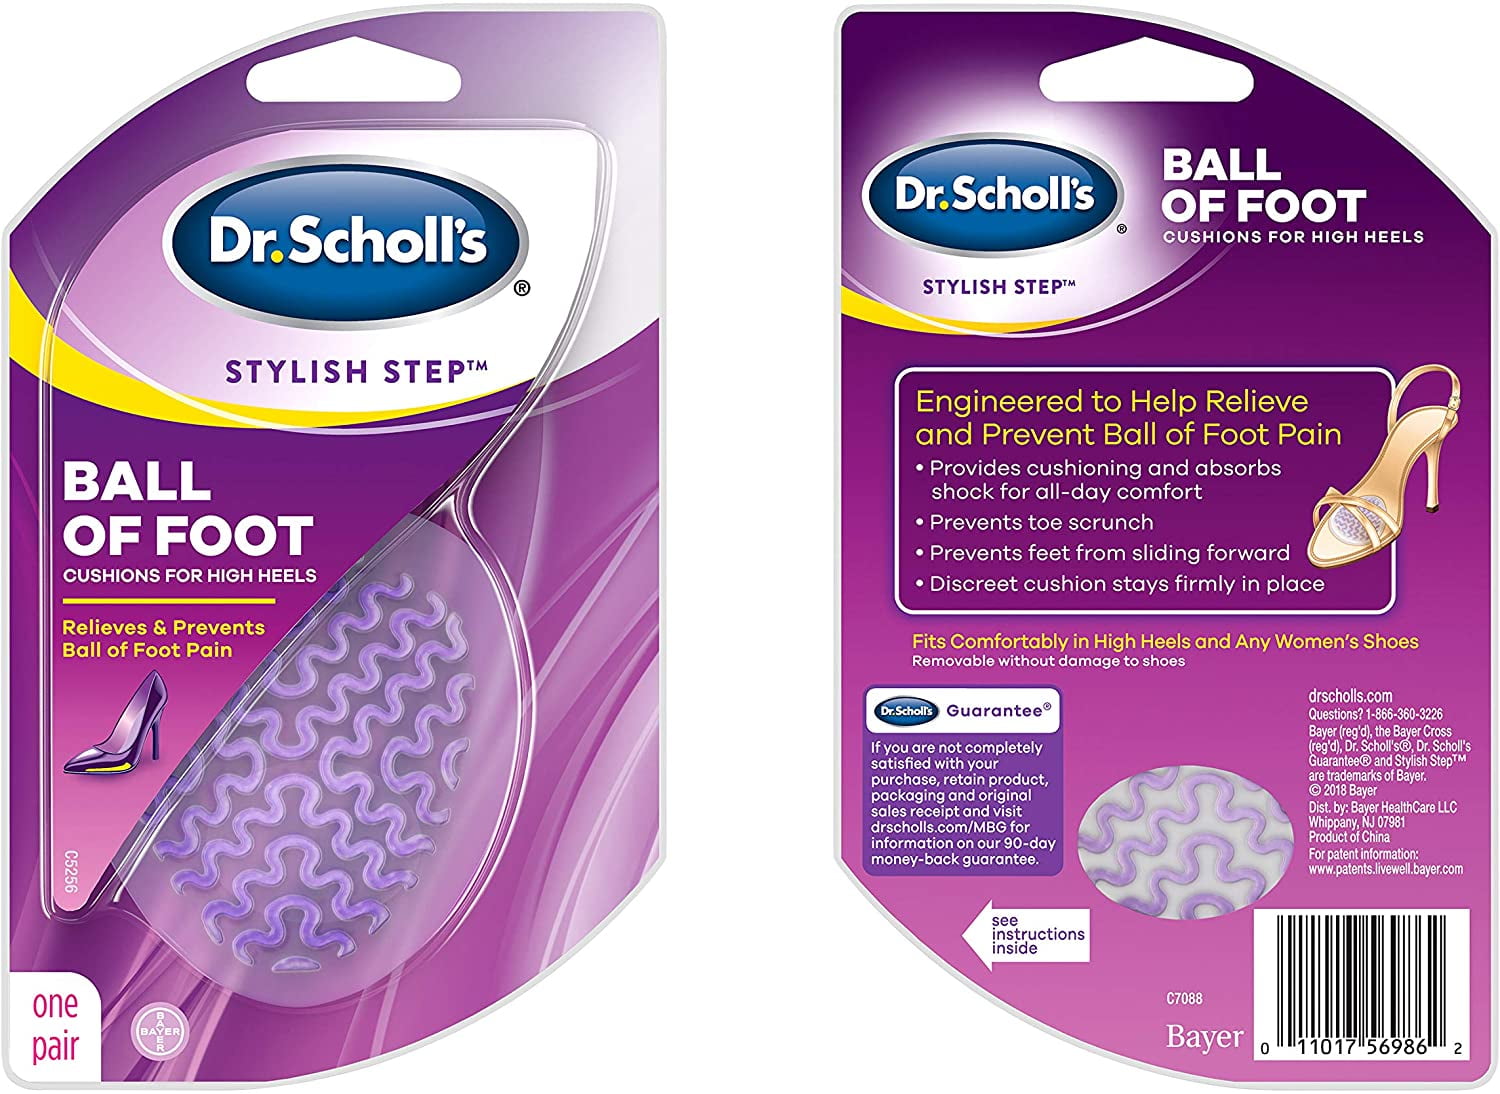 Girly Girl Giveaways: Dr Scholl's High Heel Insoles